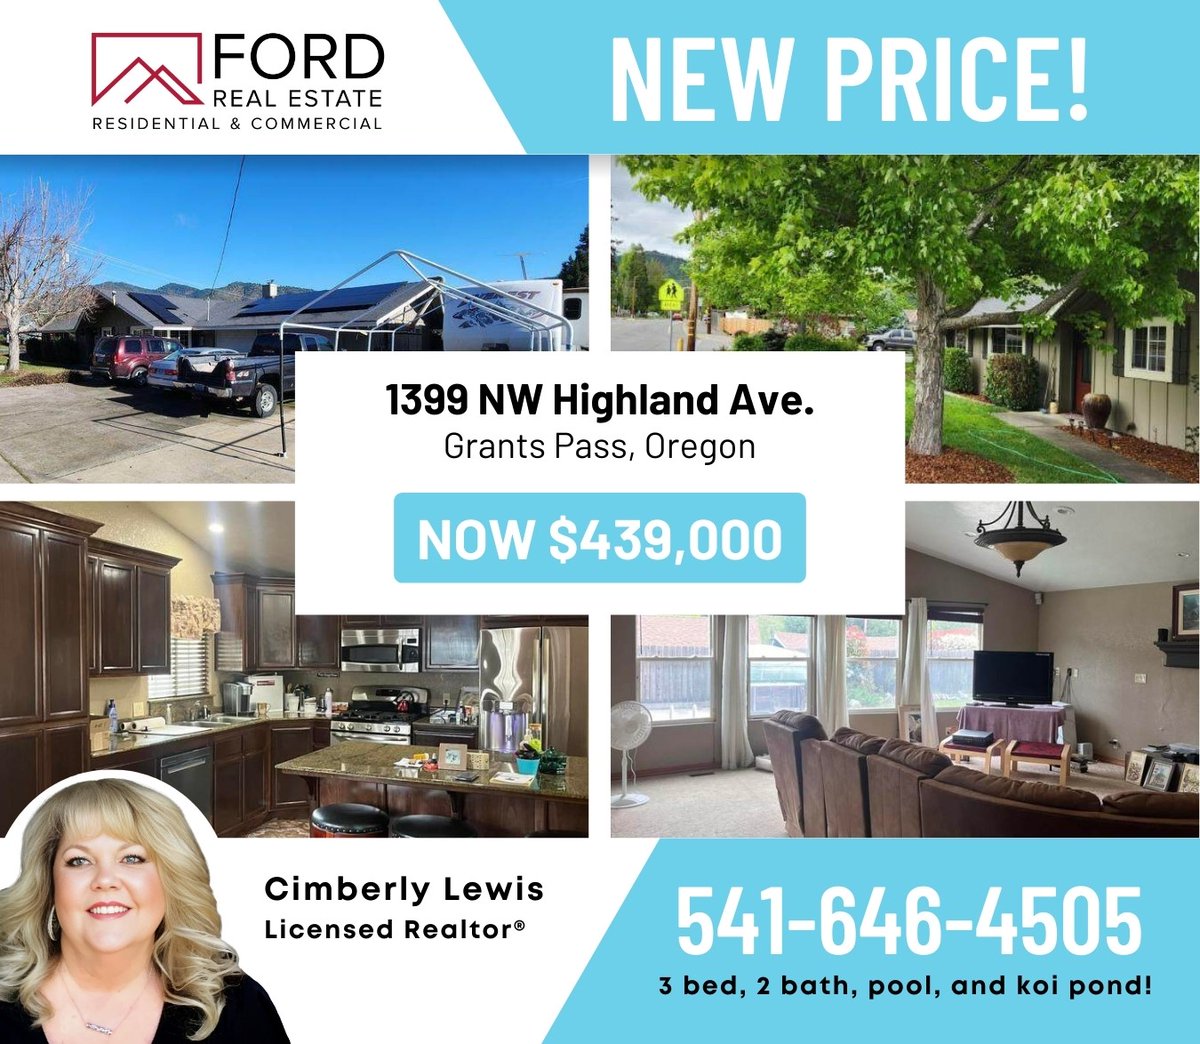 New price for Cimberly Lewis' listing at 1399 NW Highland Ave, Grants Pass, OR! zurl.co/lhav #GrantsPass #NewPrice #Realtor